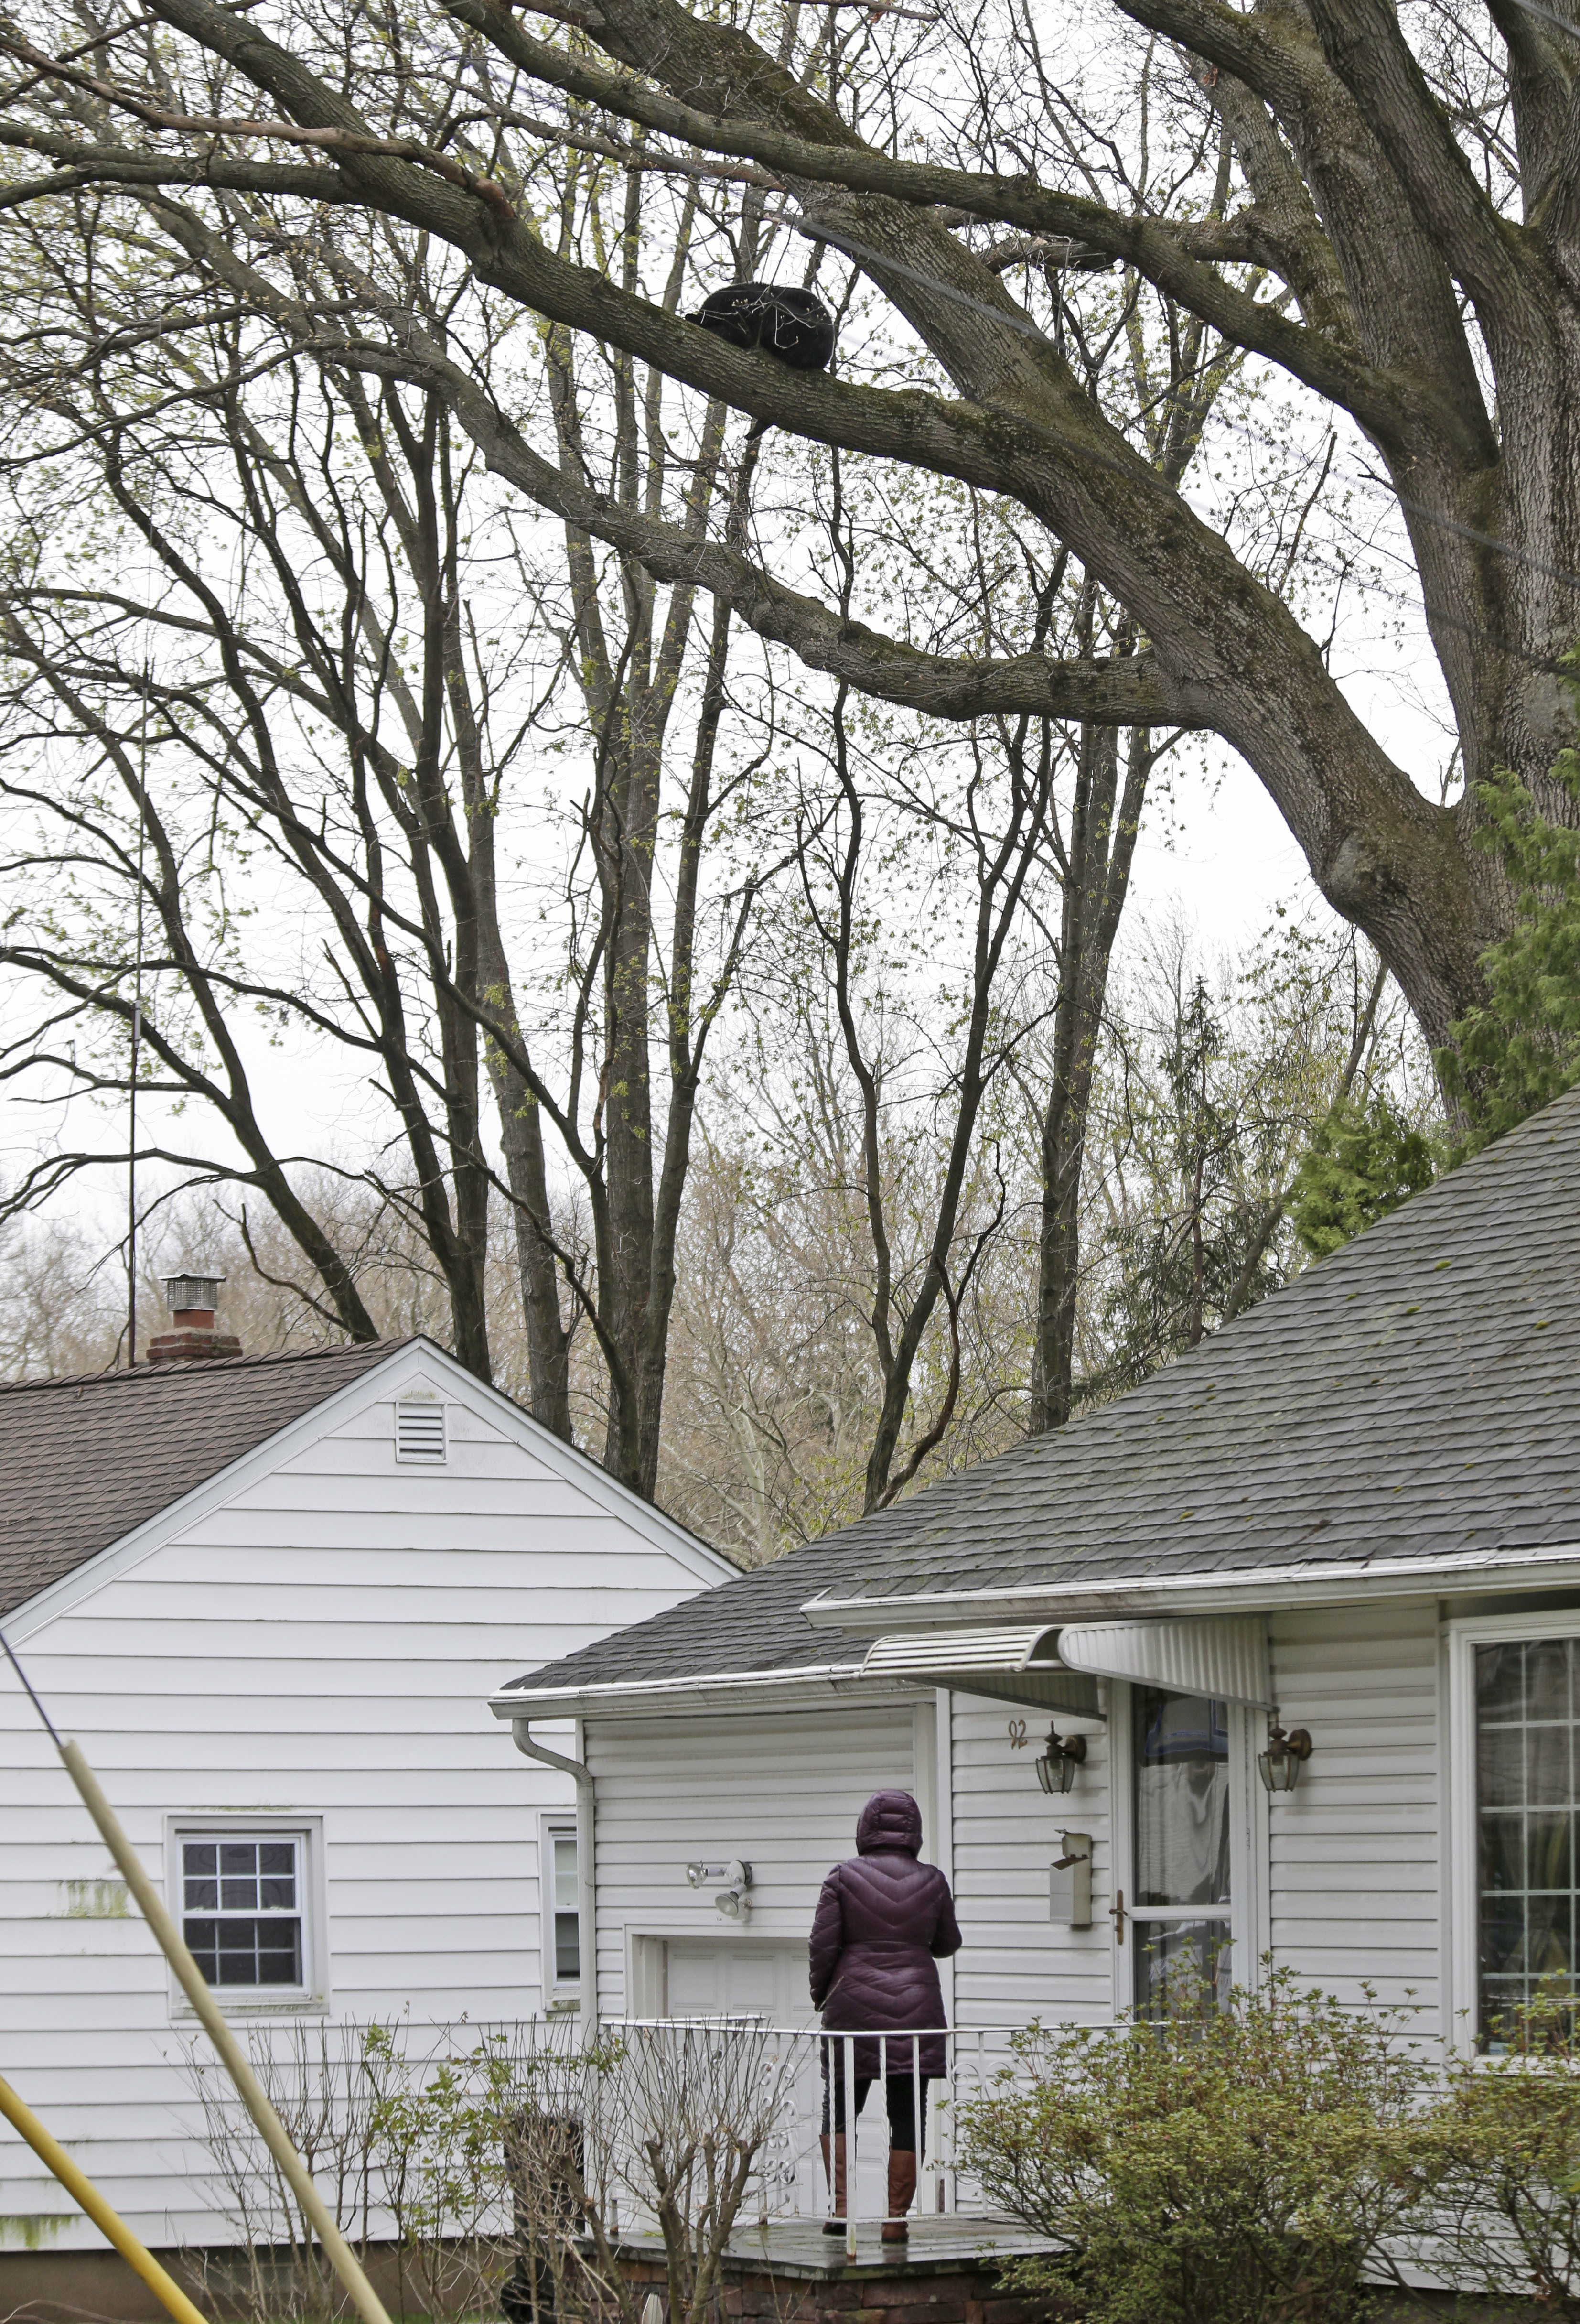 A woman looks up at a bear resting in a tree over her house in Paramus (Seth Wenig/AP)